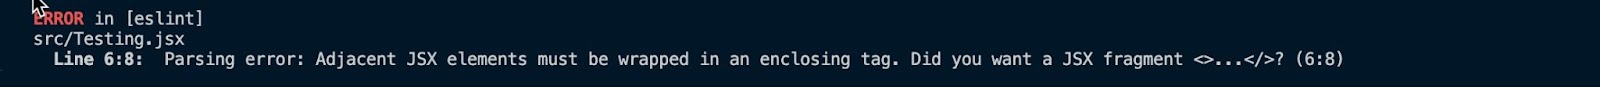 Adjacent JSX elements must be wrapped in an enclosing tag. Did you want a JSX fragment <>...</>? error message